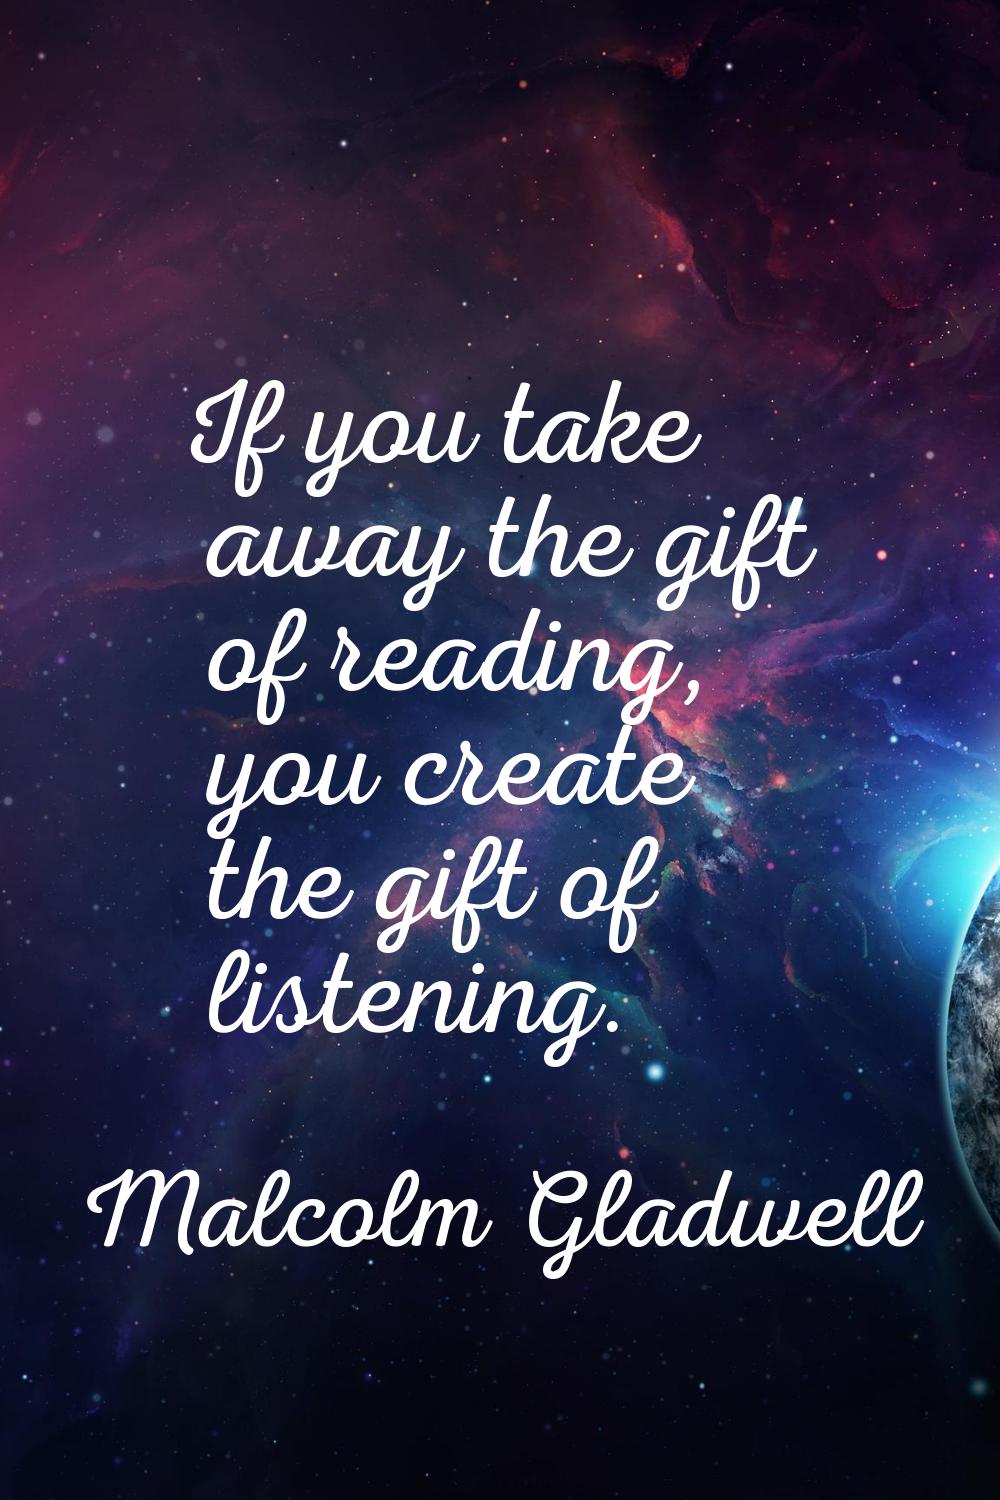 If you take away the gift of reading, you create the gift of listening.